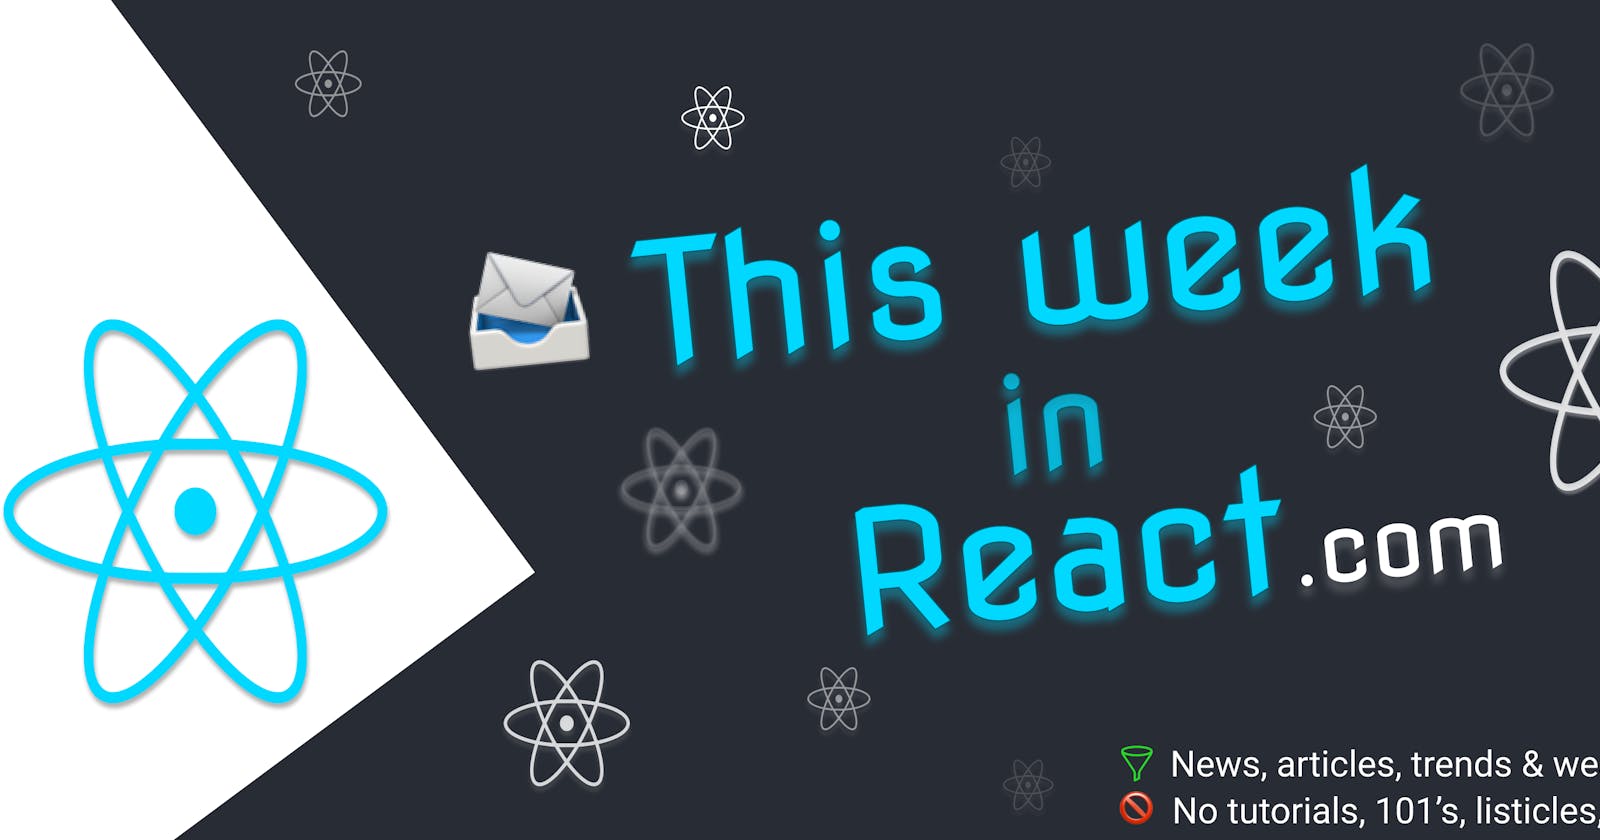 This Week In React #91: Remix, Next.js, Server Components, Forms, React-Native, TypeScript, Monorepos...